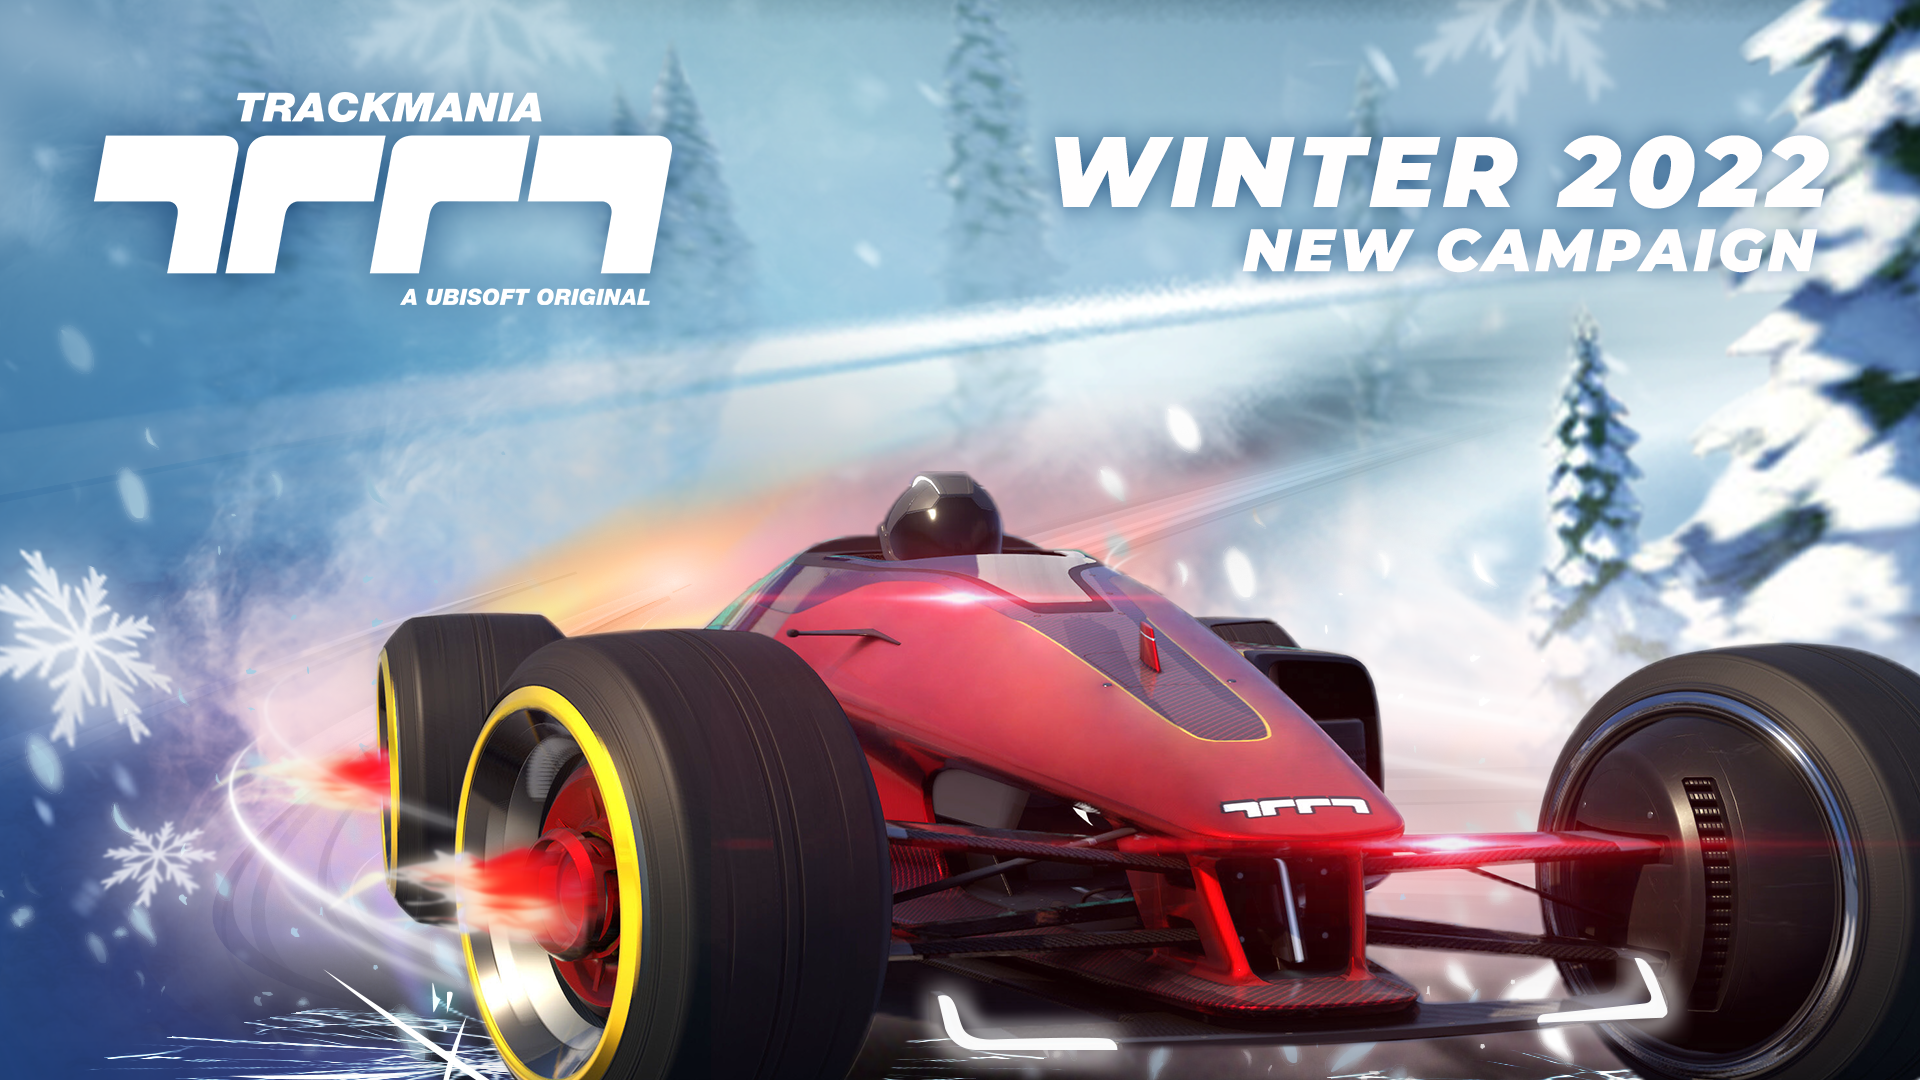 The Winter 2022 campaign is out!